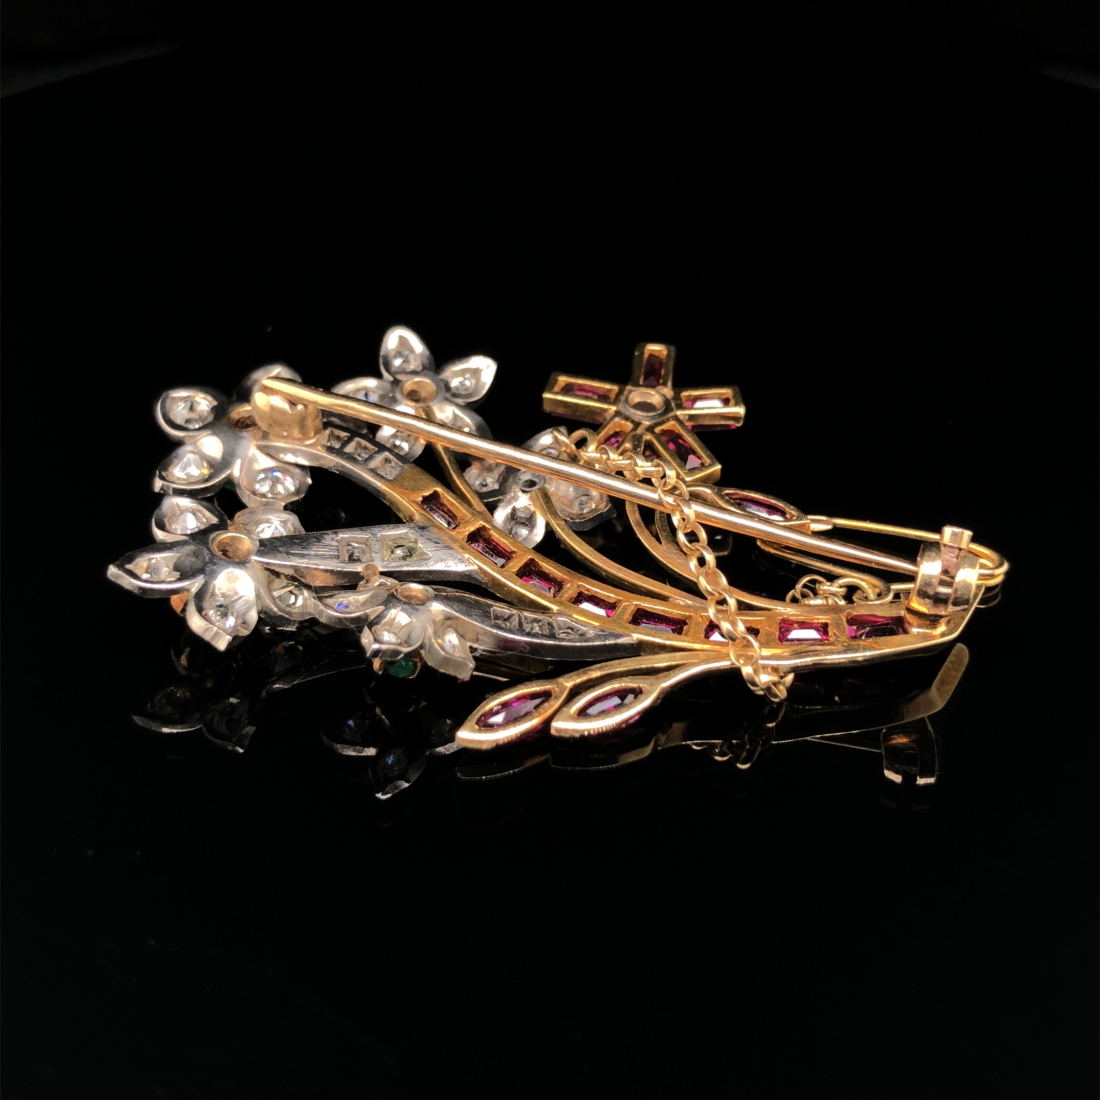 A 20th CENTURY DIAMOND, EMERALD AND RUBY SPRAY BROOCH. THE BROOCH UNHALLMARKED, ASSESSED VARIOUSLY - Image 5 of 6